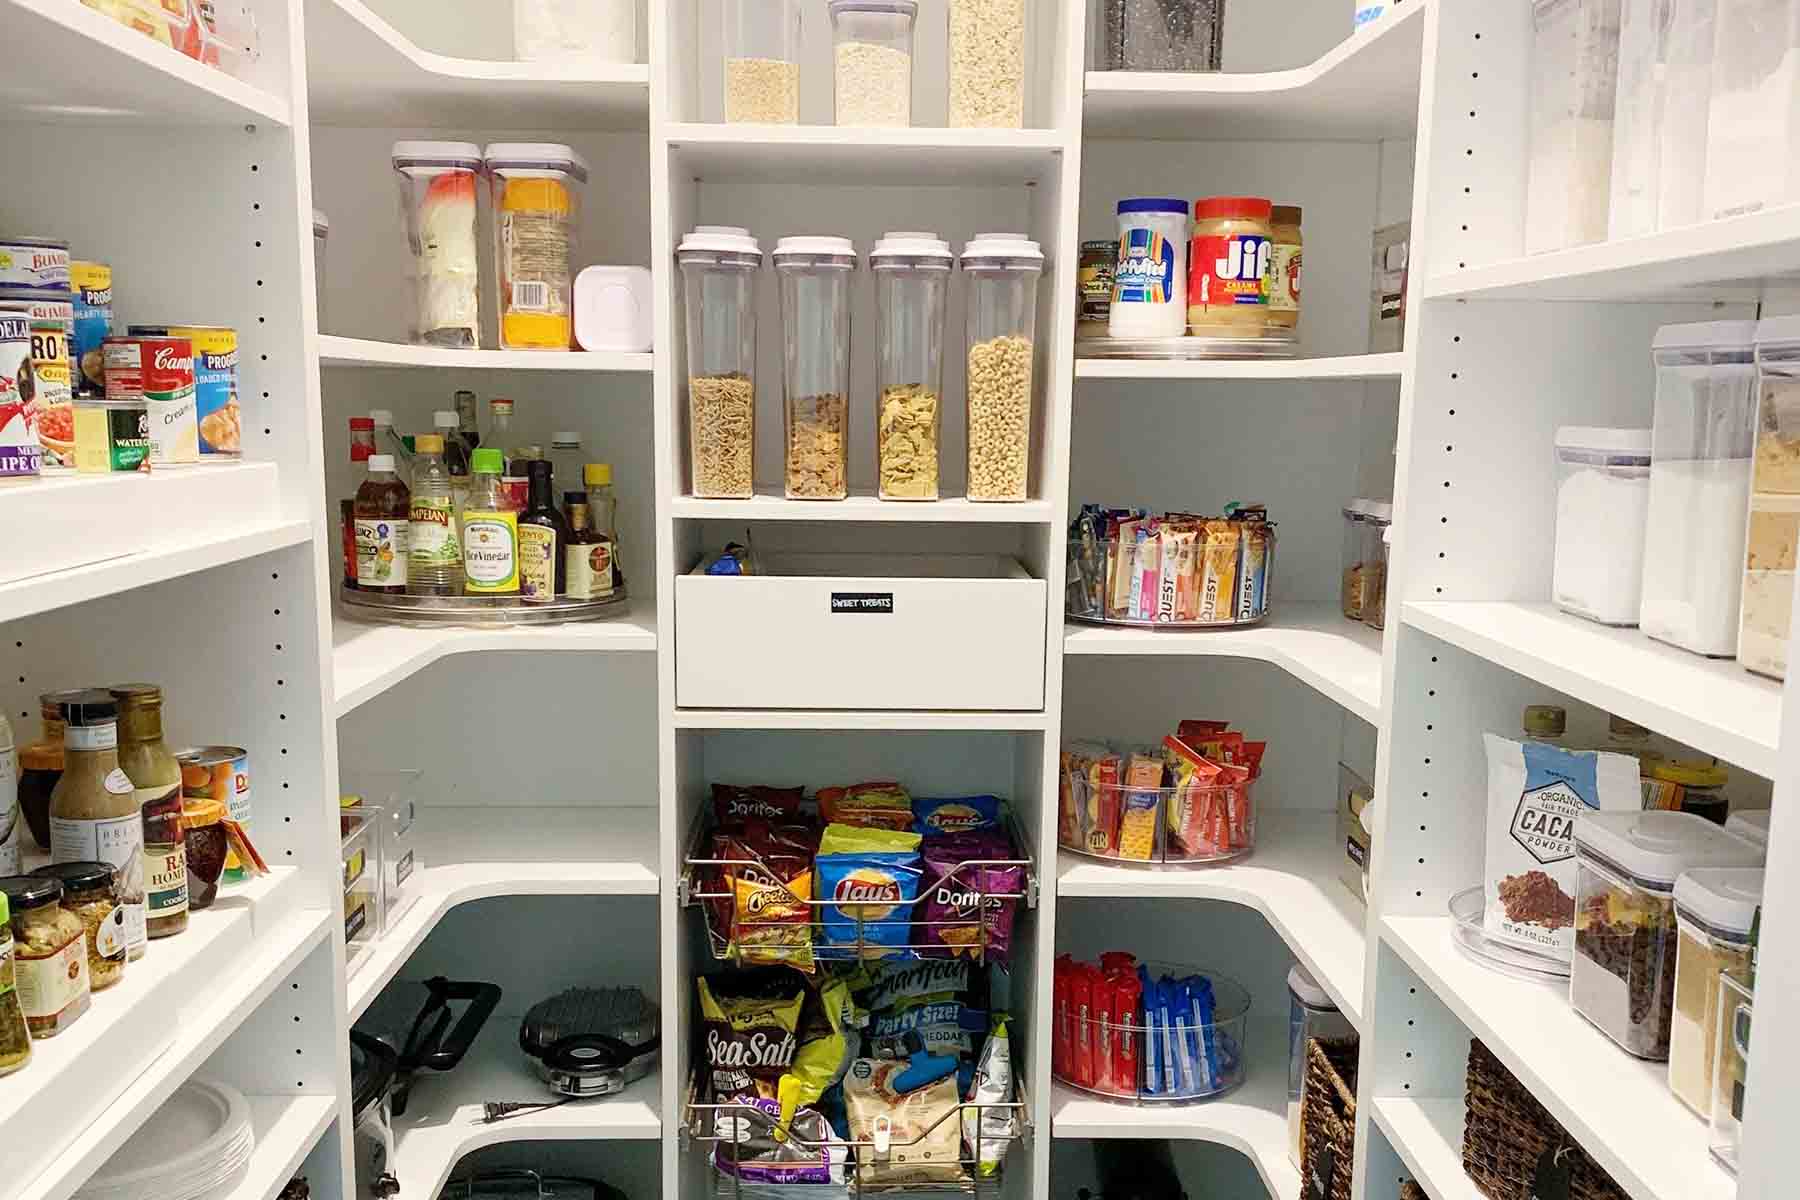 10 Genius Pantry Canned Food Organizer Ideas You Need to Try